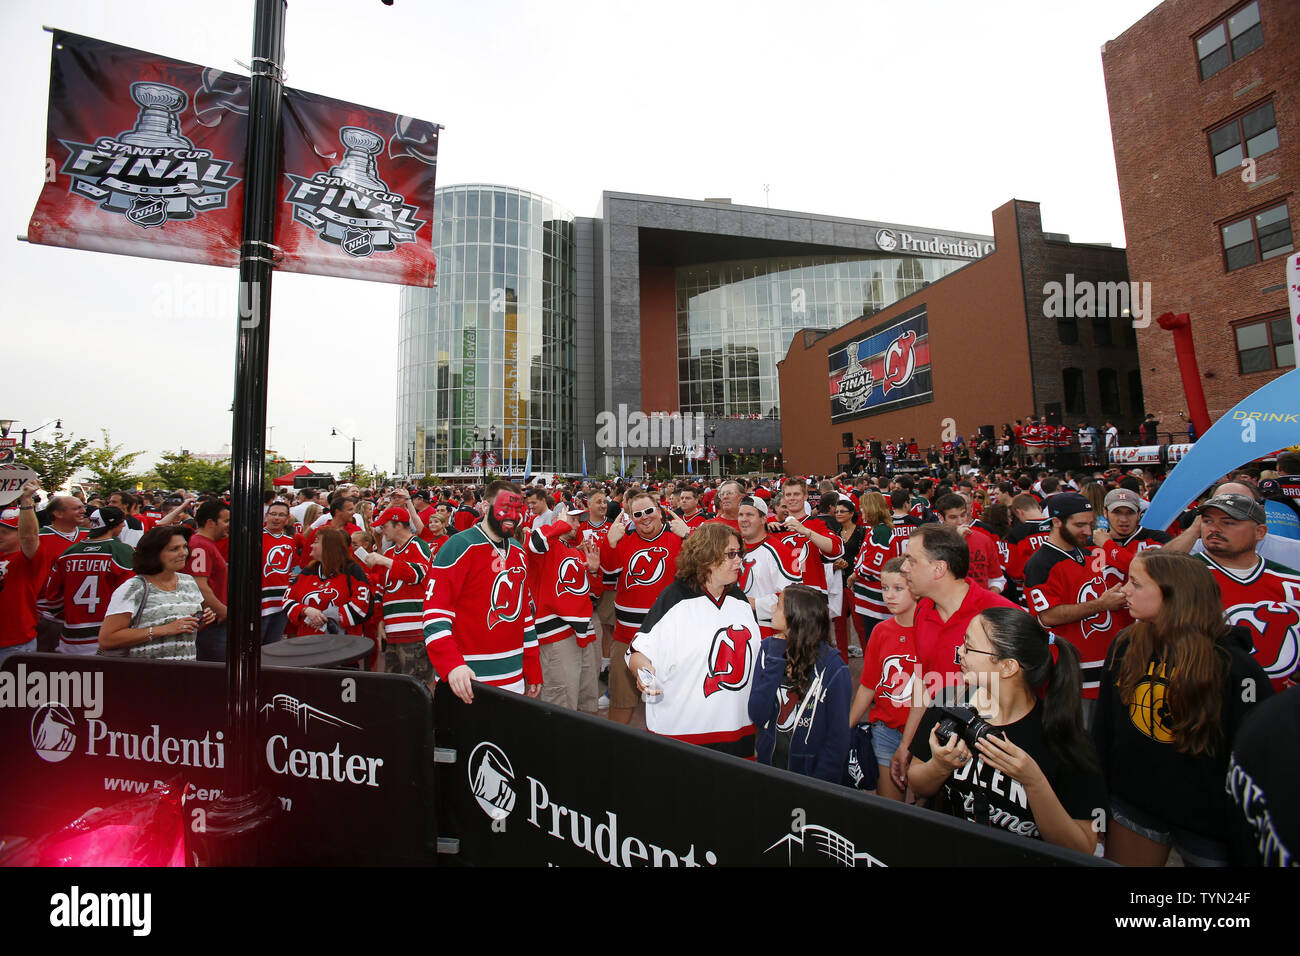 Here's how Devils fans can live large at Prudential Center: Debut